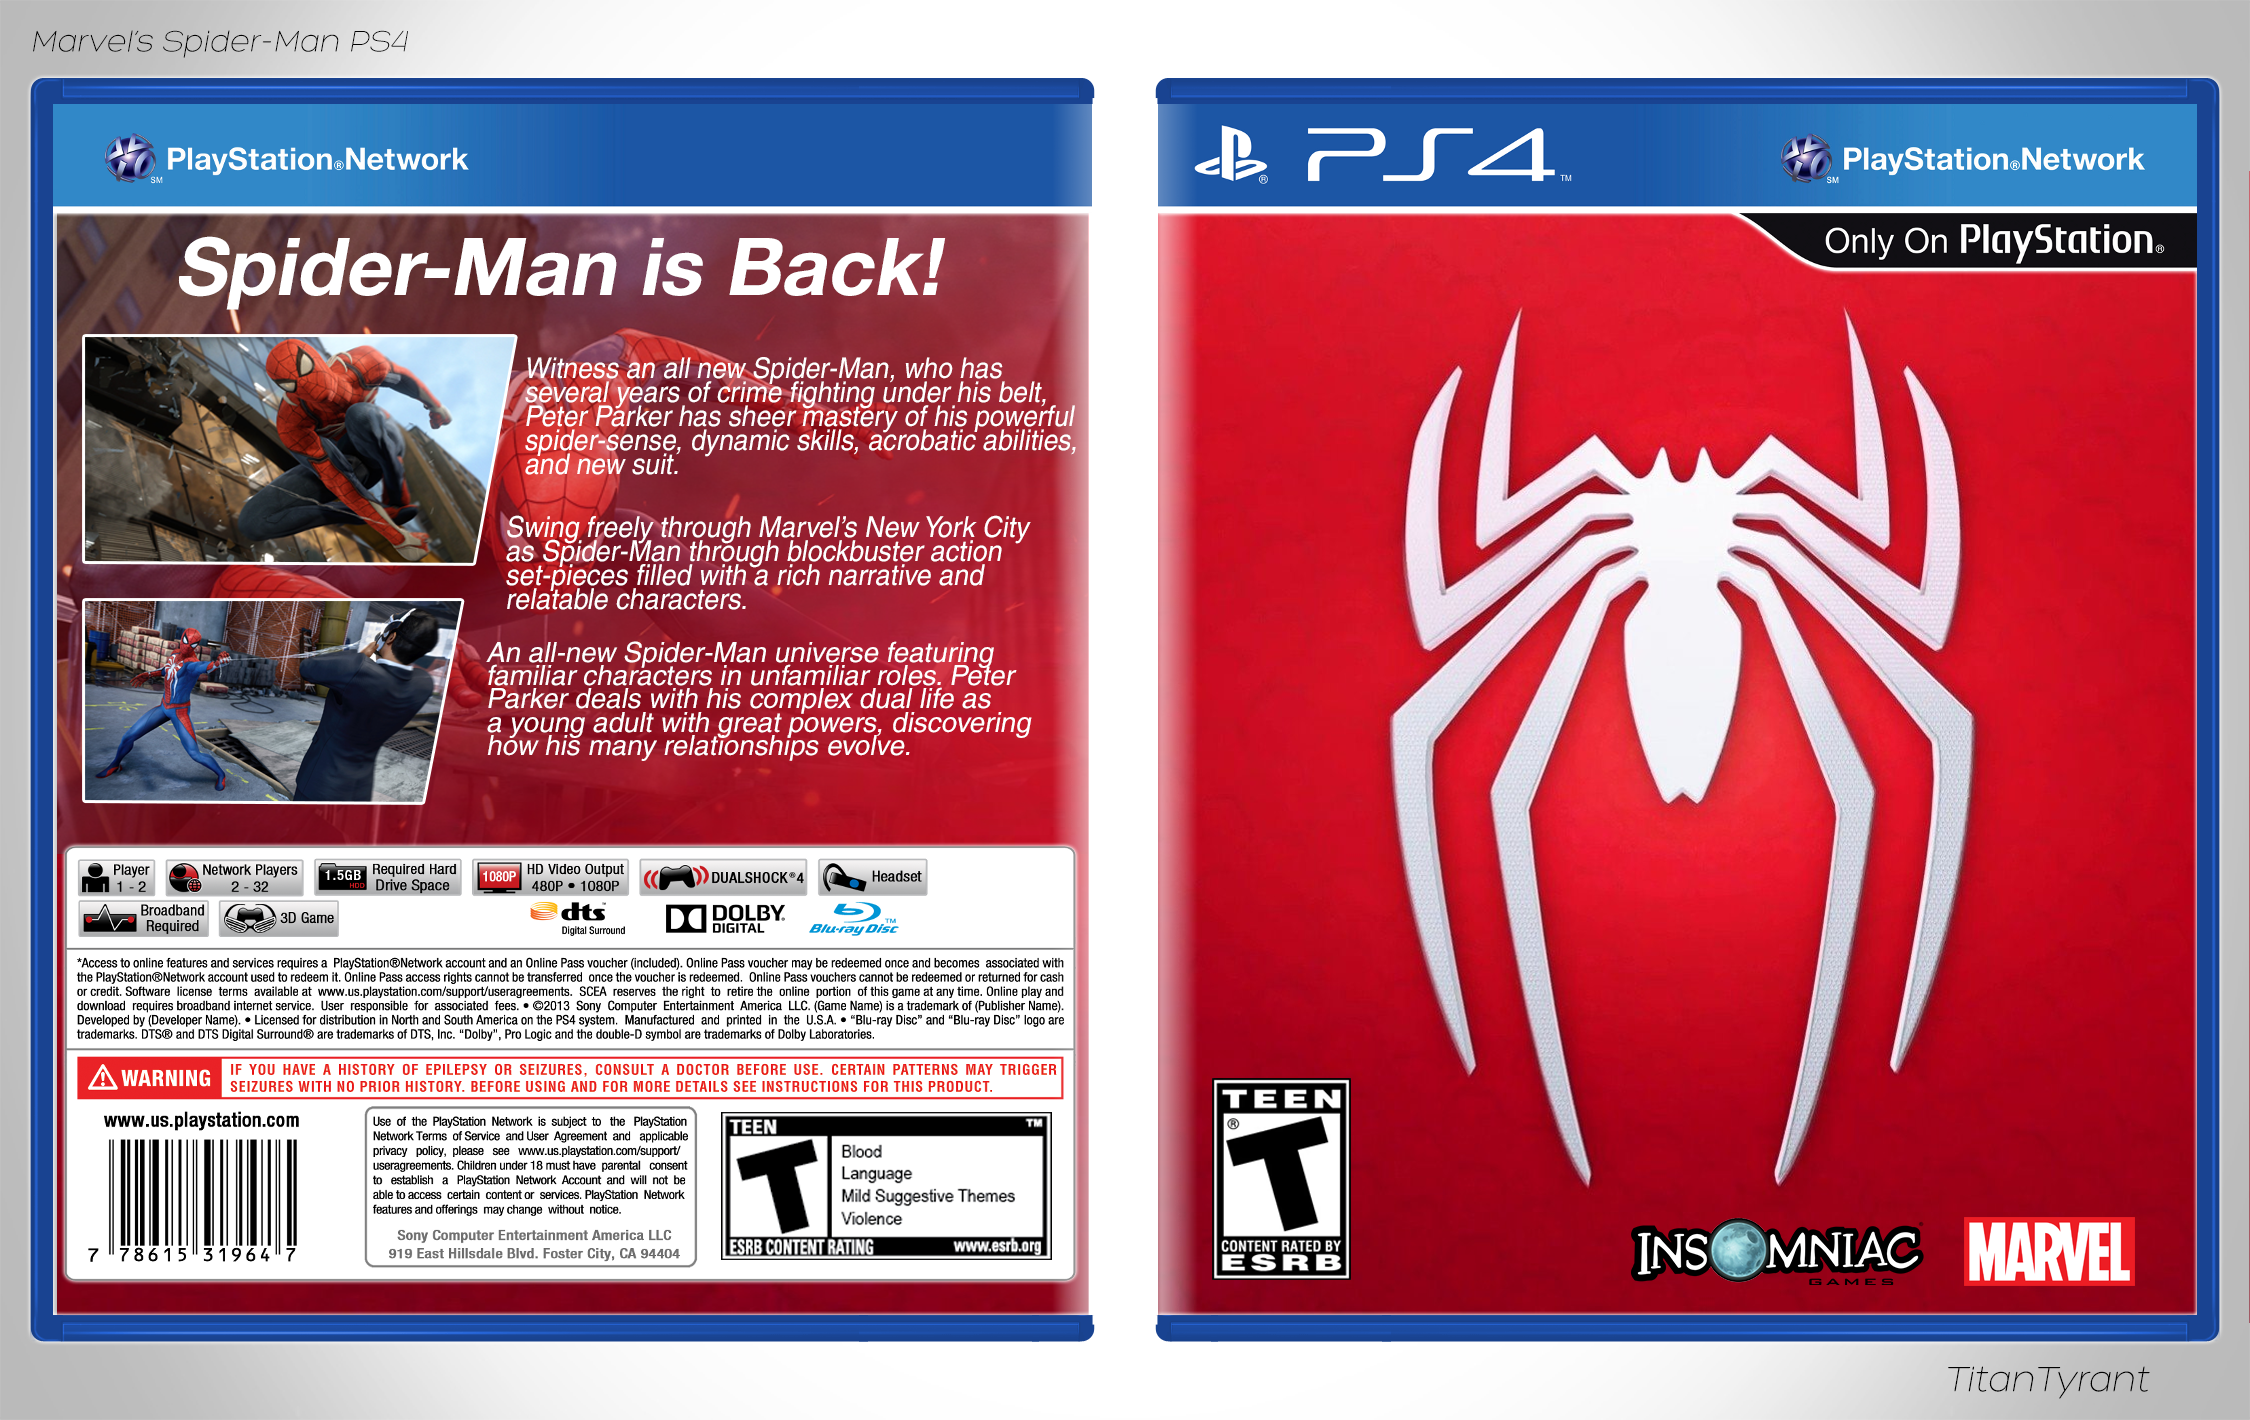 Viewing full Spider-Man: PS4 (box art) box cover